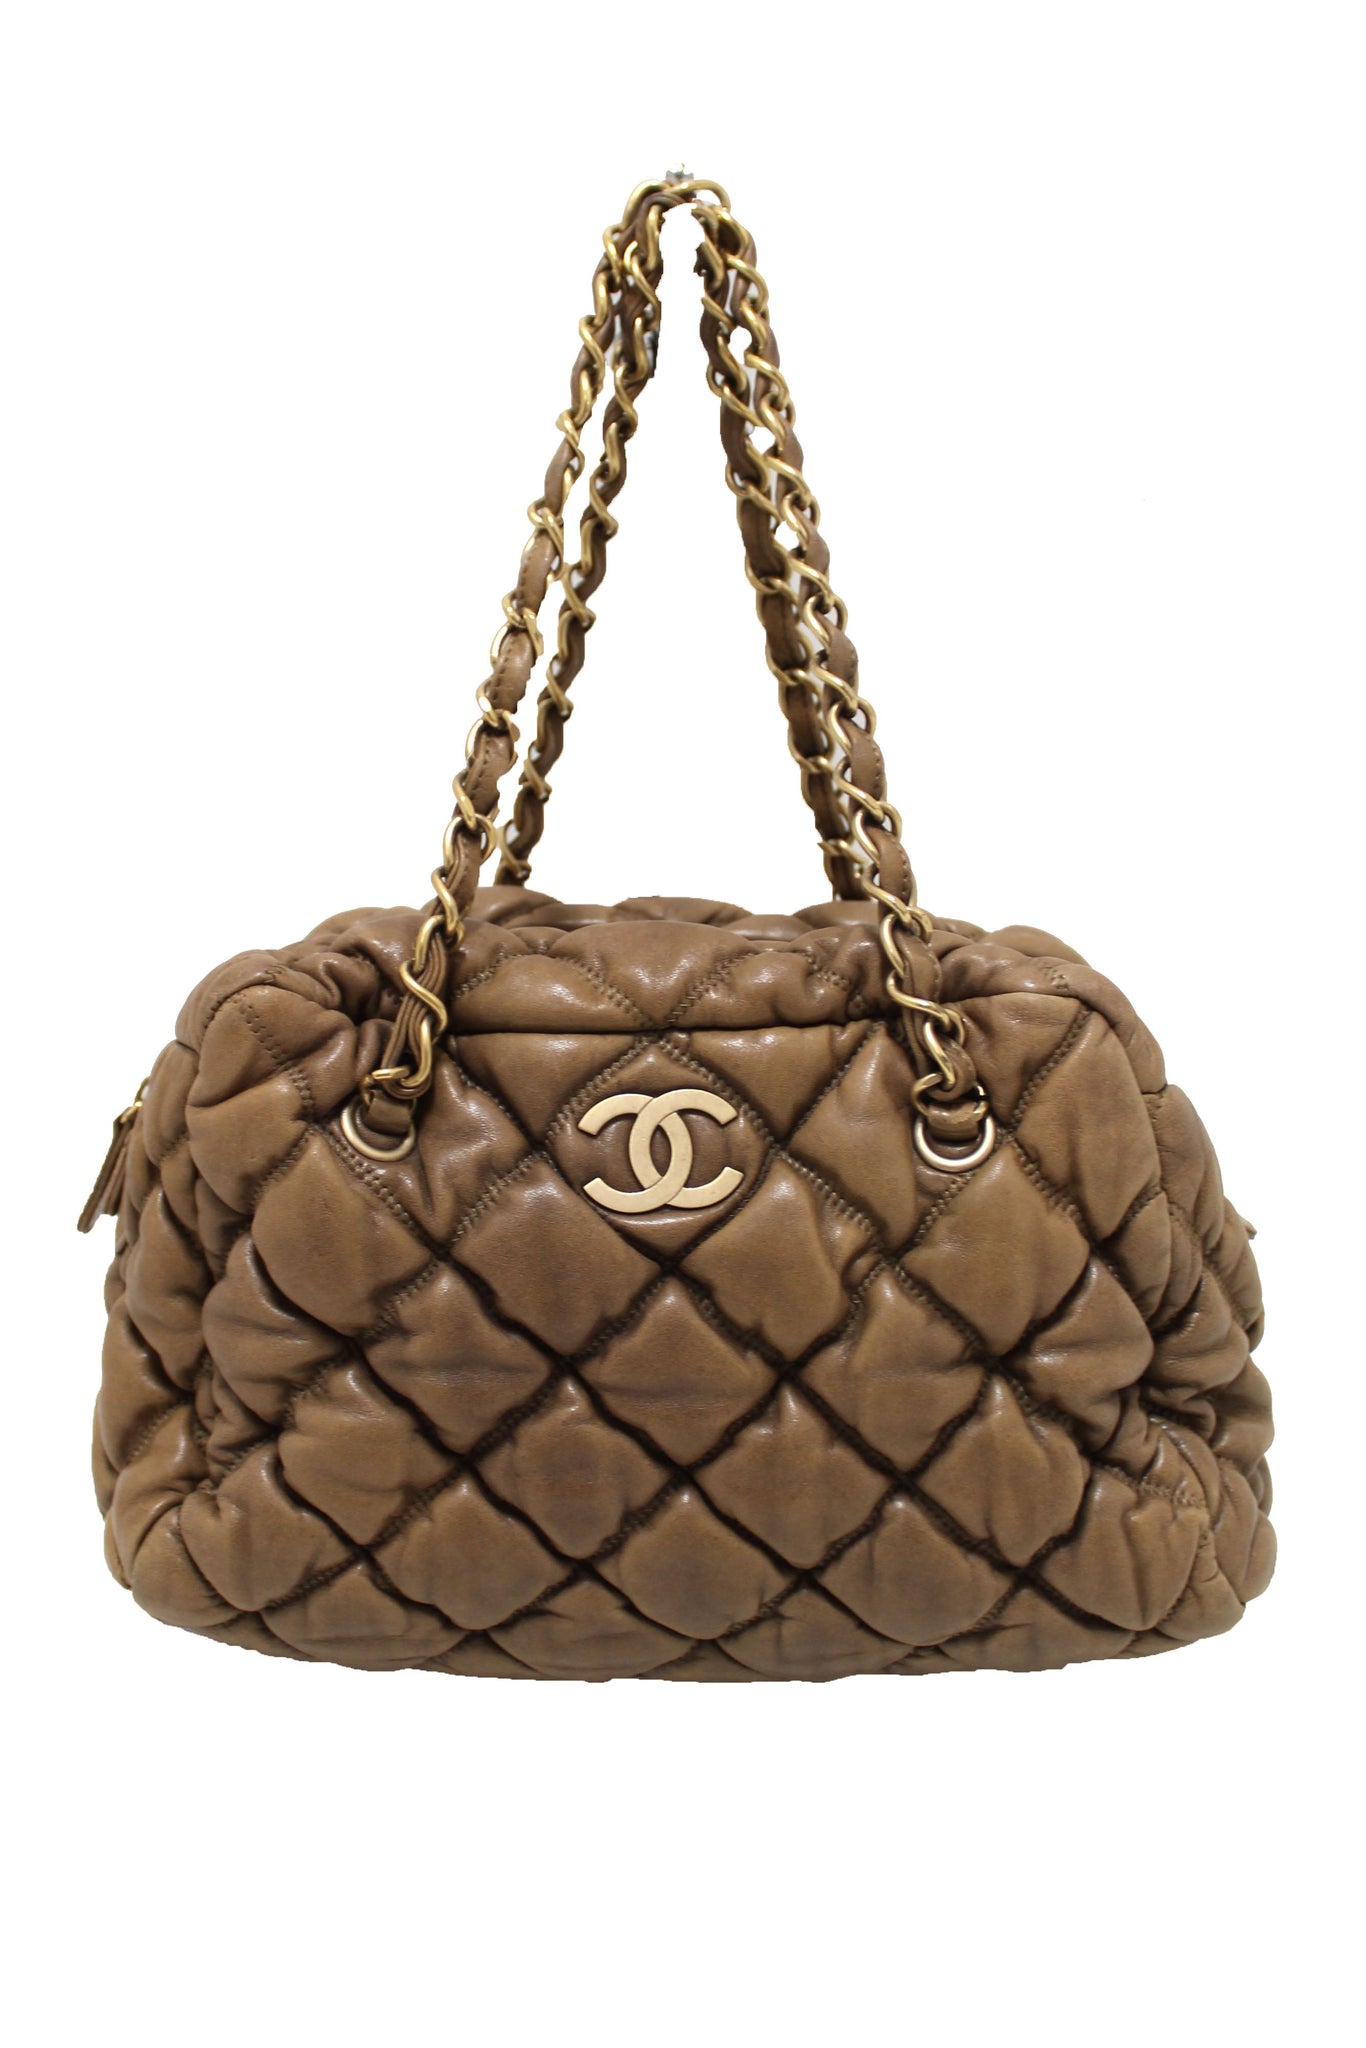 Chanel Bubble-Quilted Bowler Bag